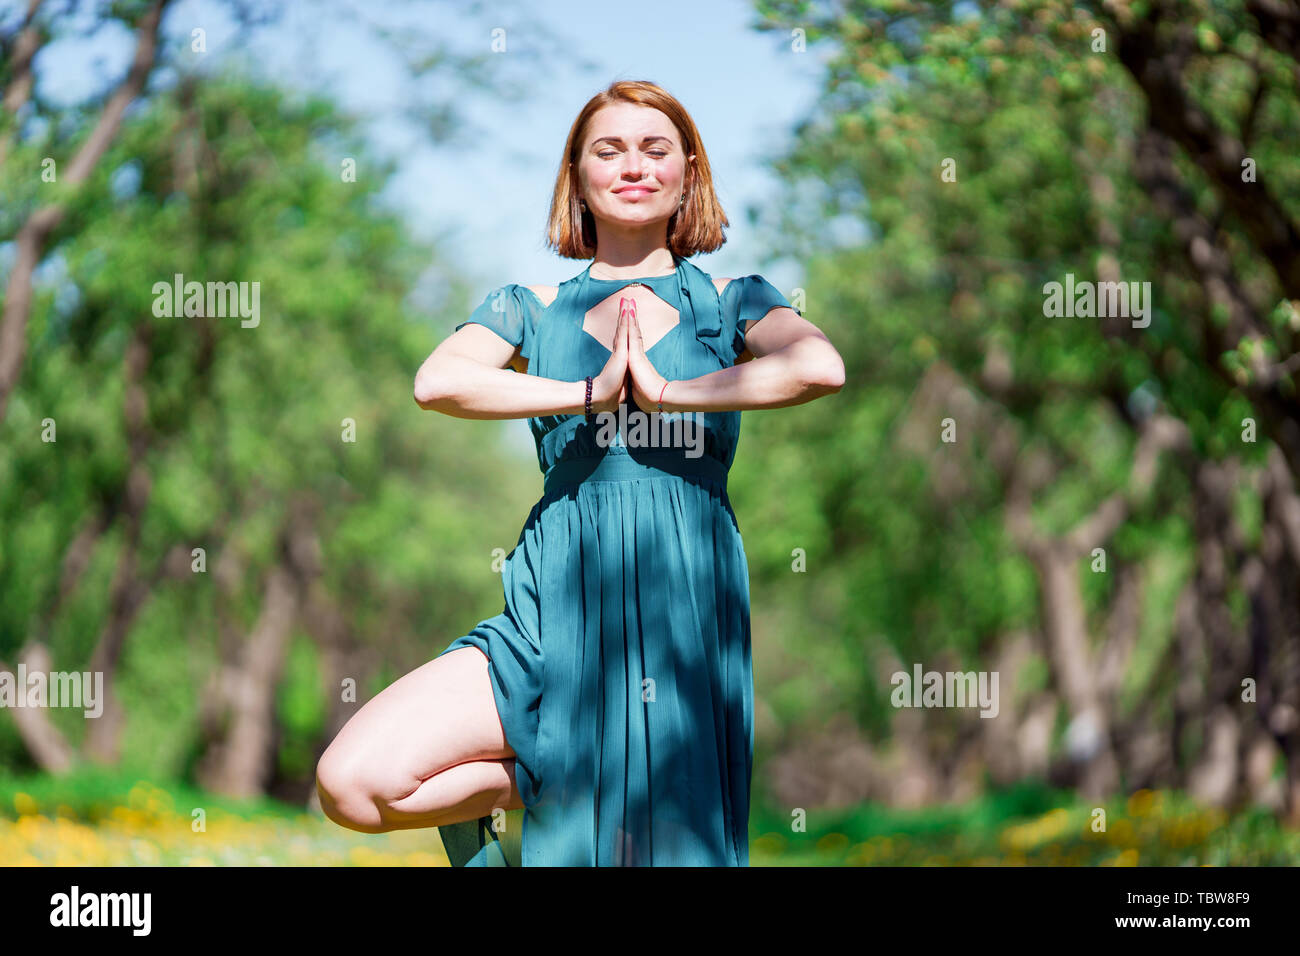 Portrait Of Woman In Long Green Dress Doing Yoga In Forest Stock